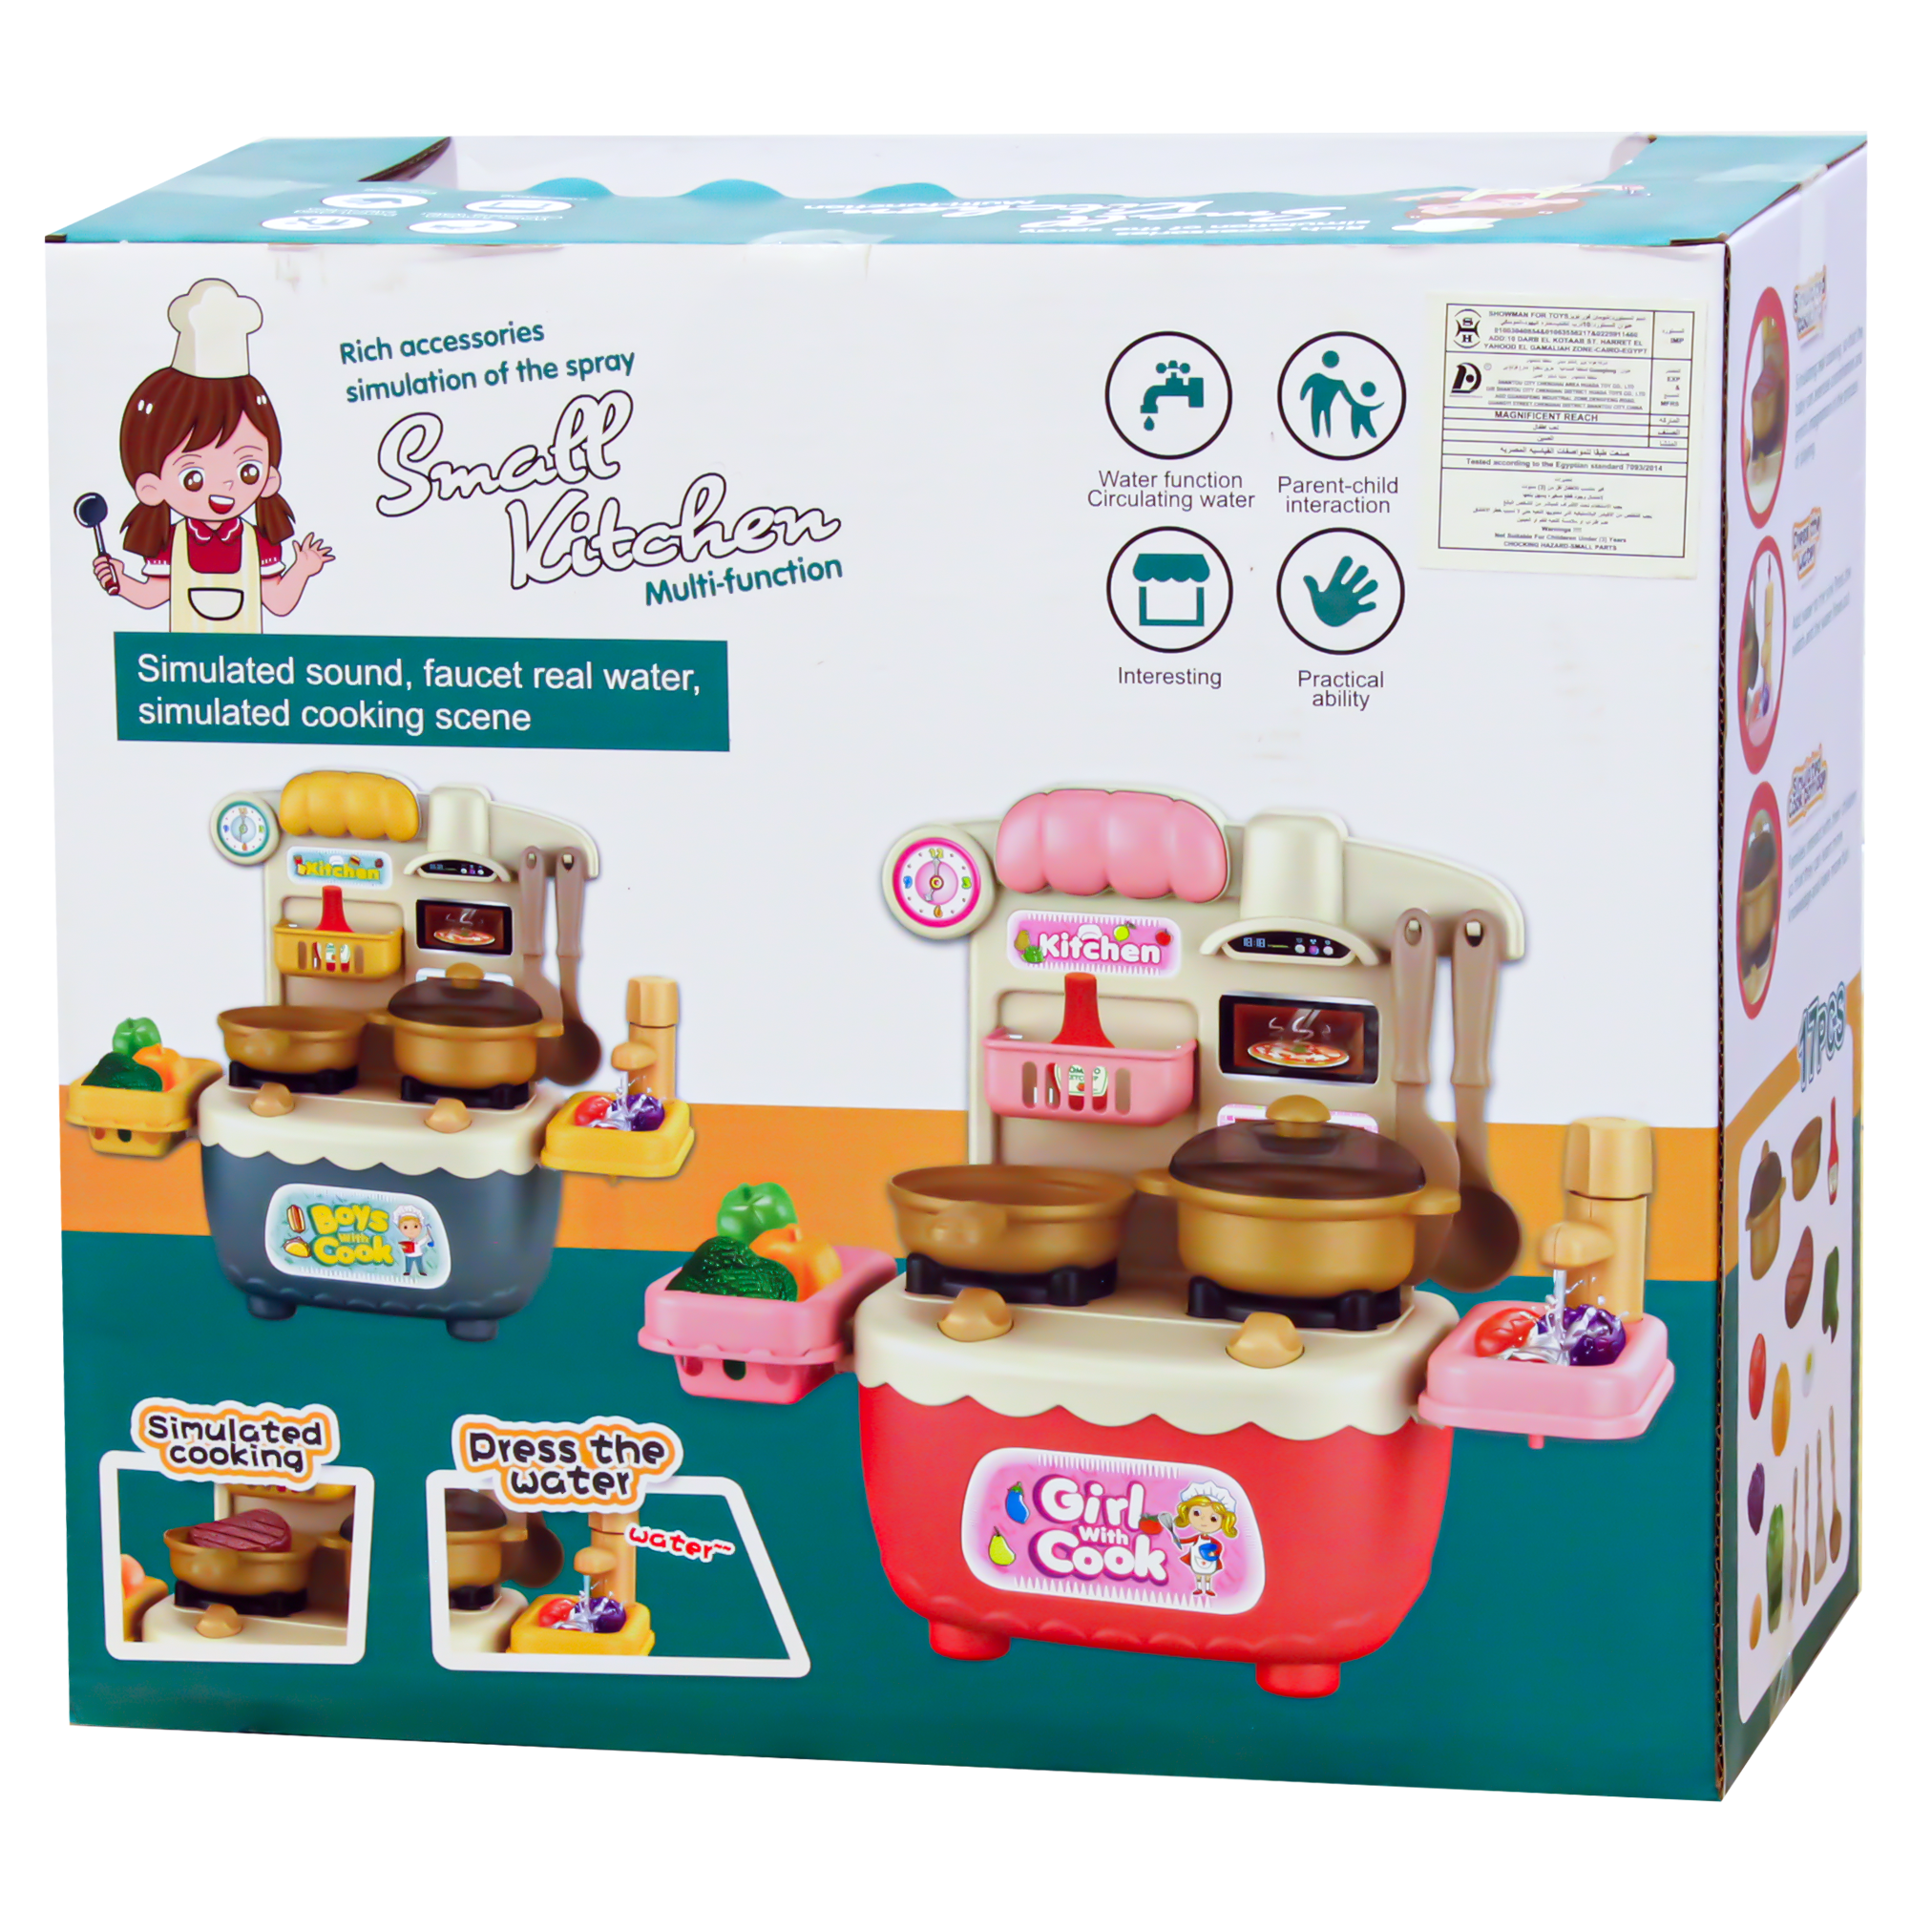 Small Kitchen Multi-function Girl With Cook - Pink